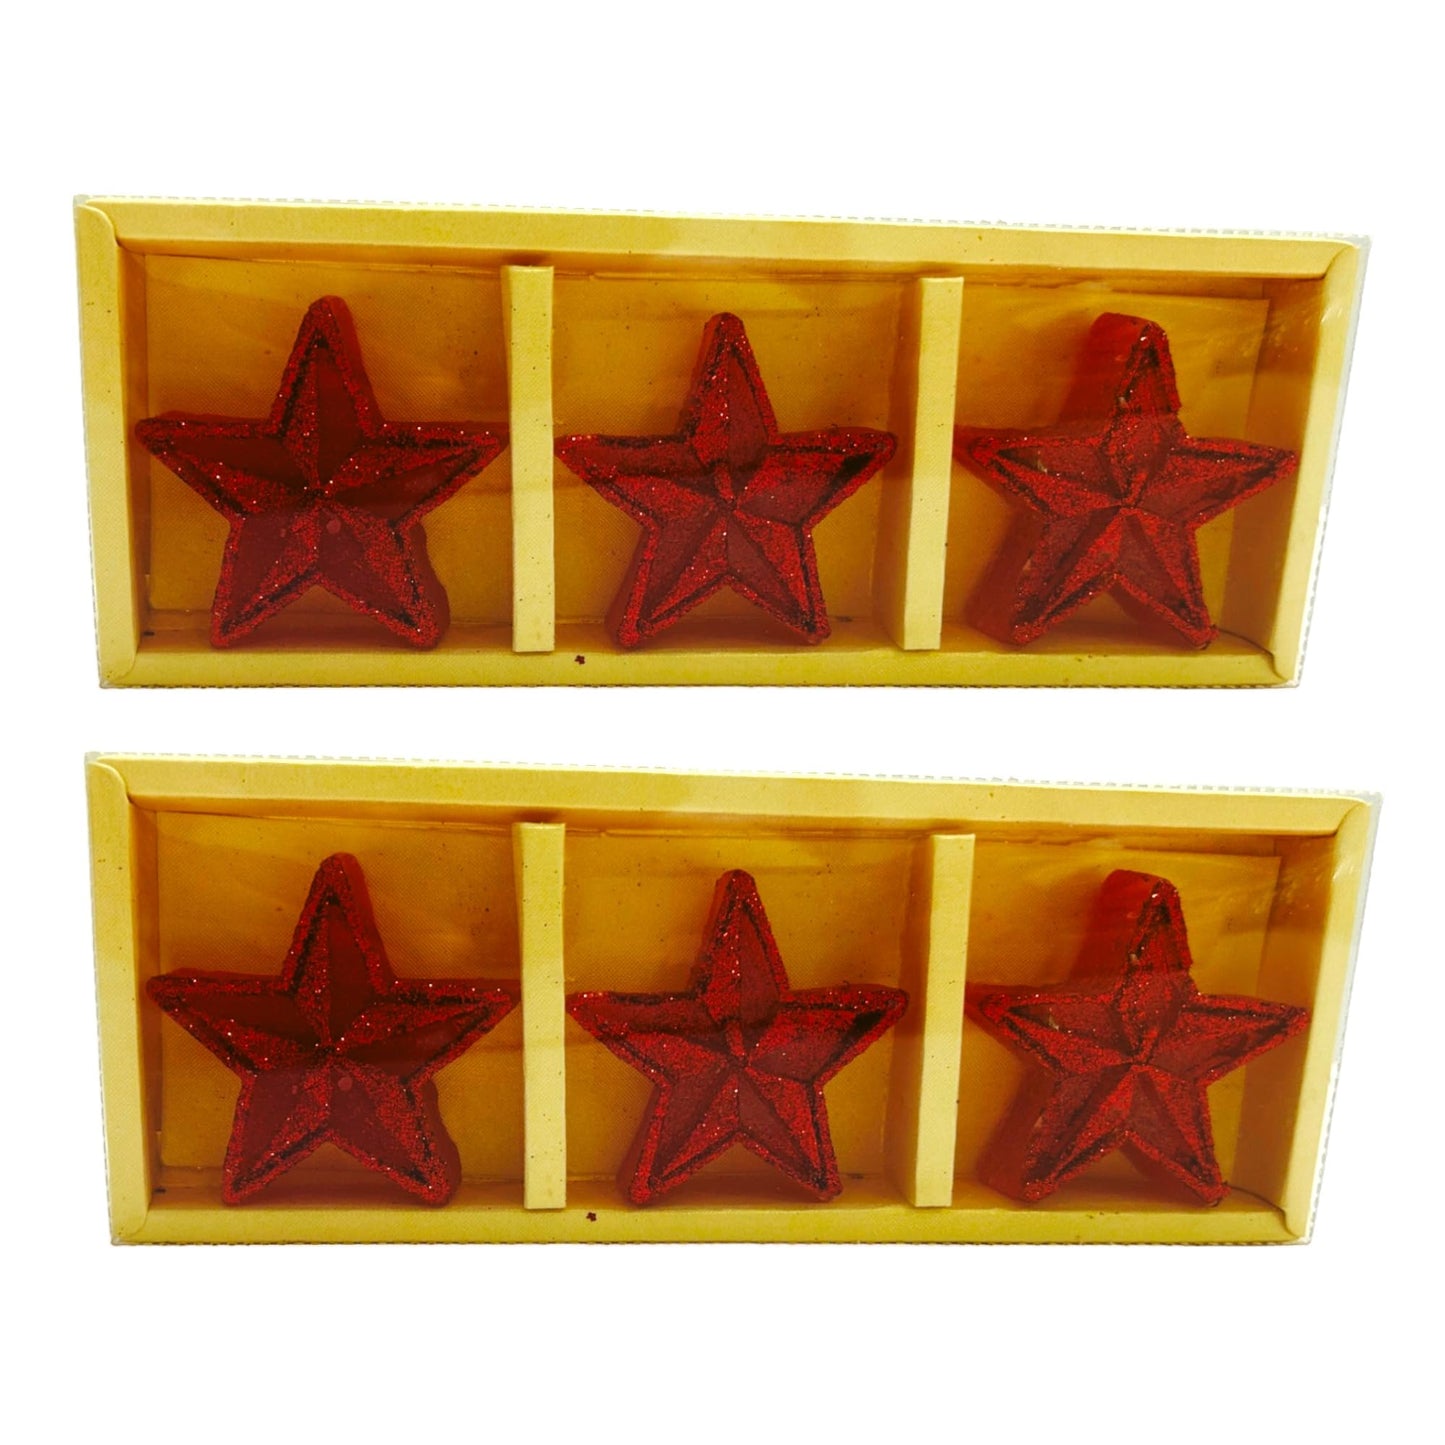 Pujahome Star Shape Candle for Decoration, Diwali Decoration for Home, Office Pack of 6 Candles(Red Color)